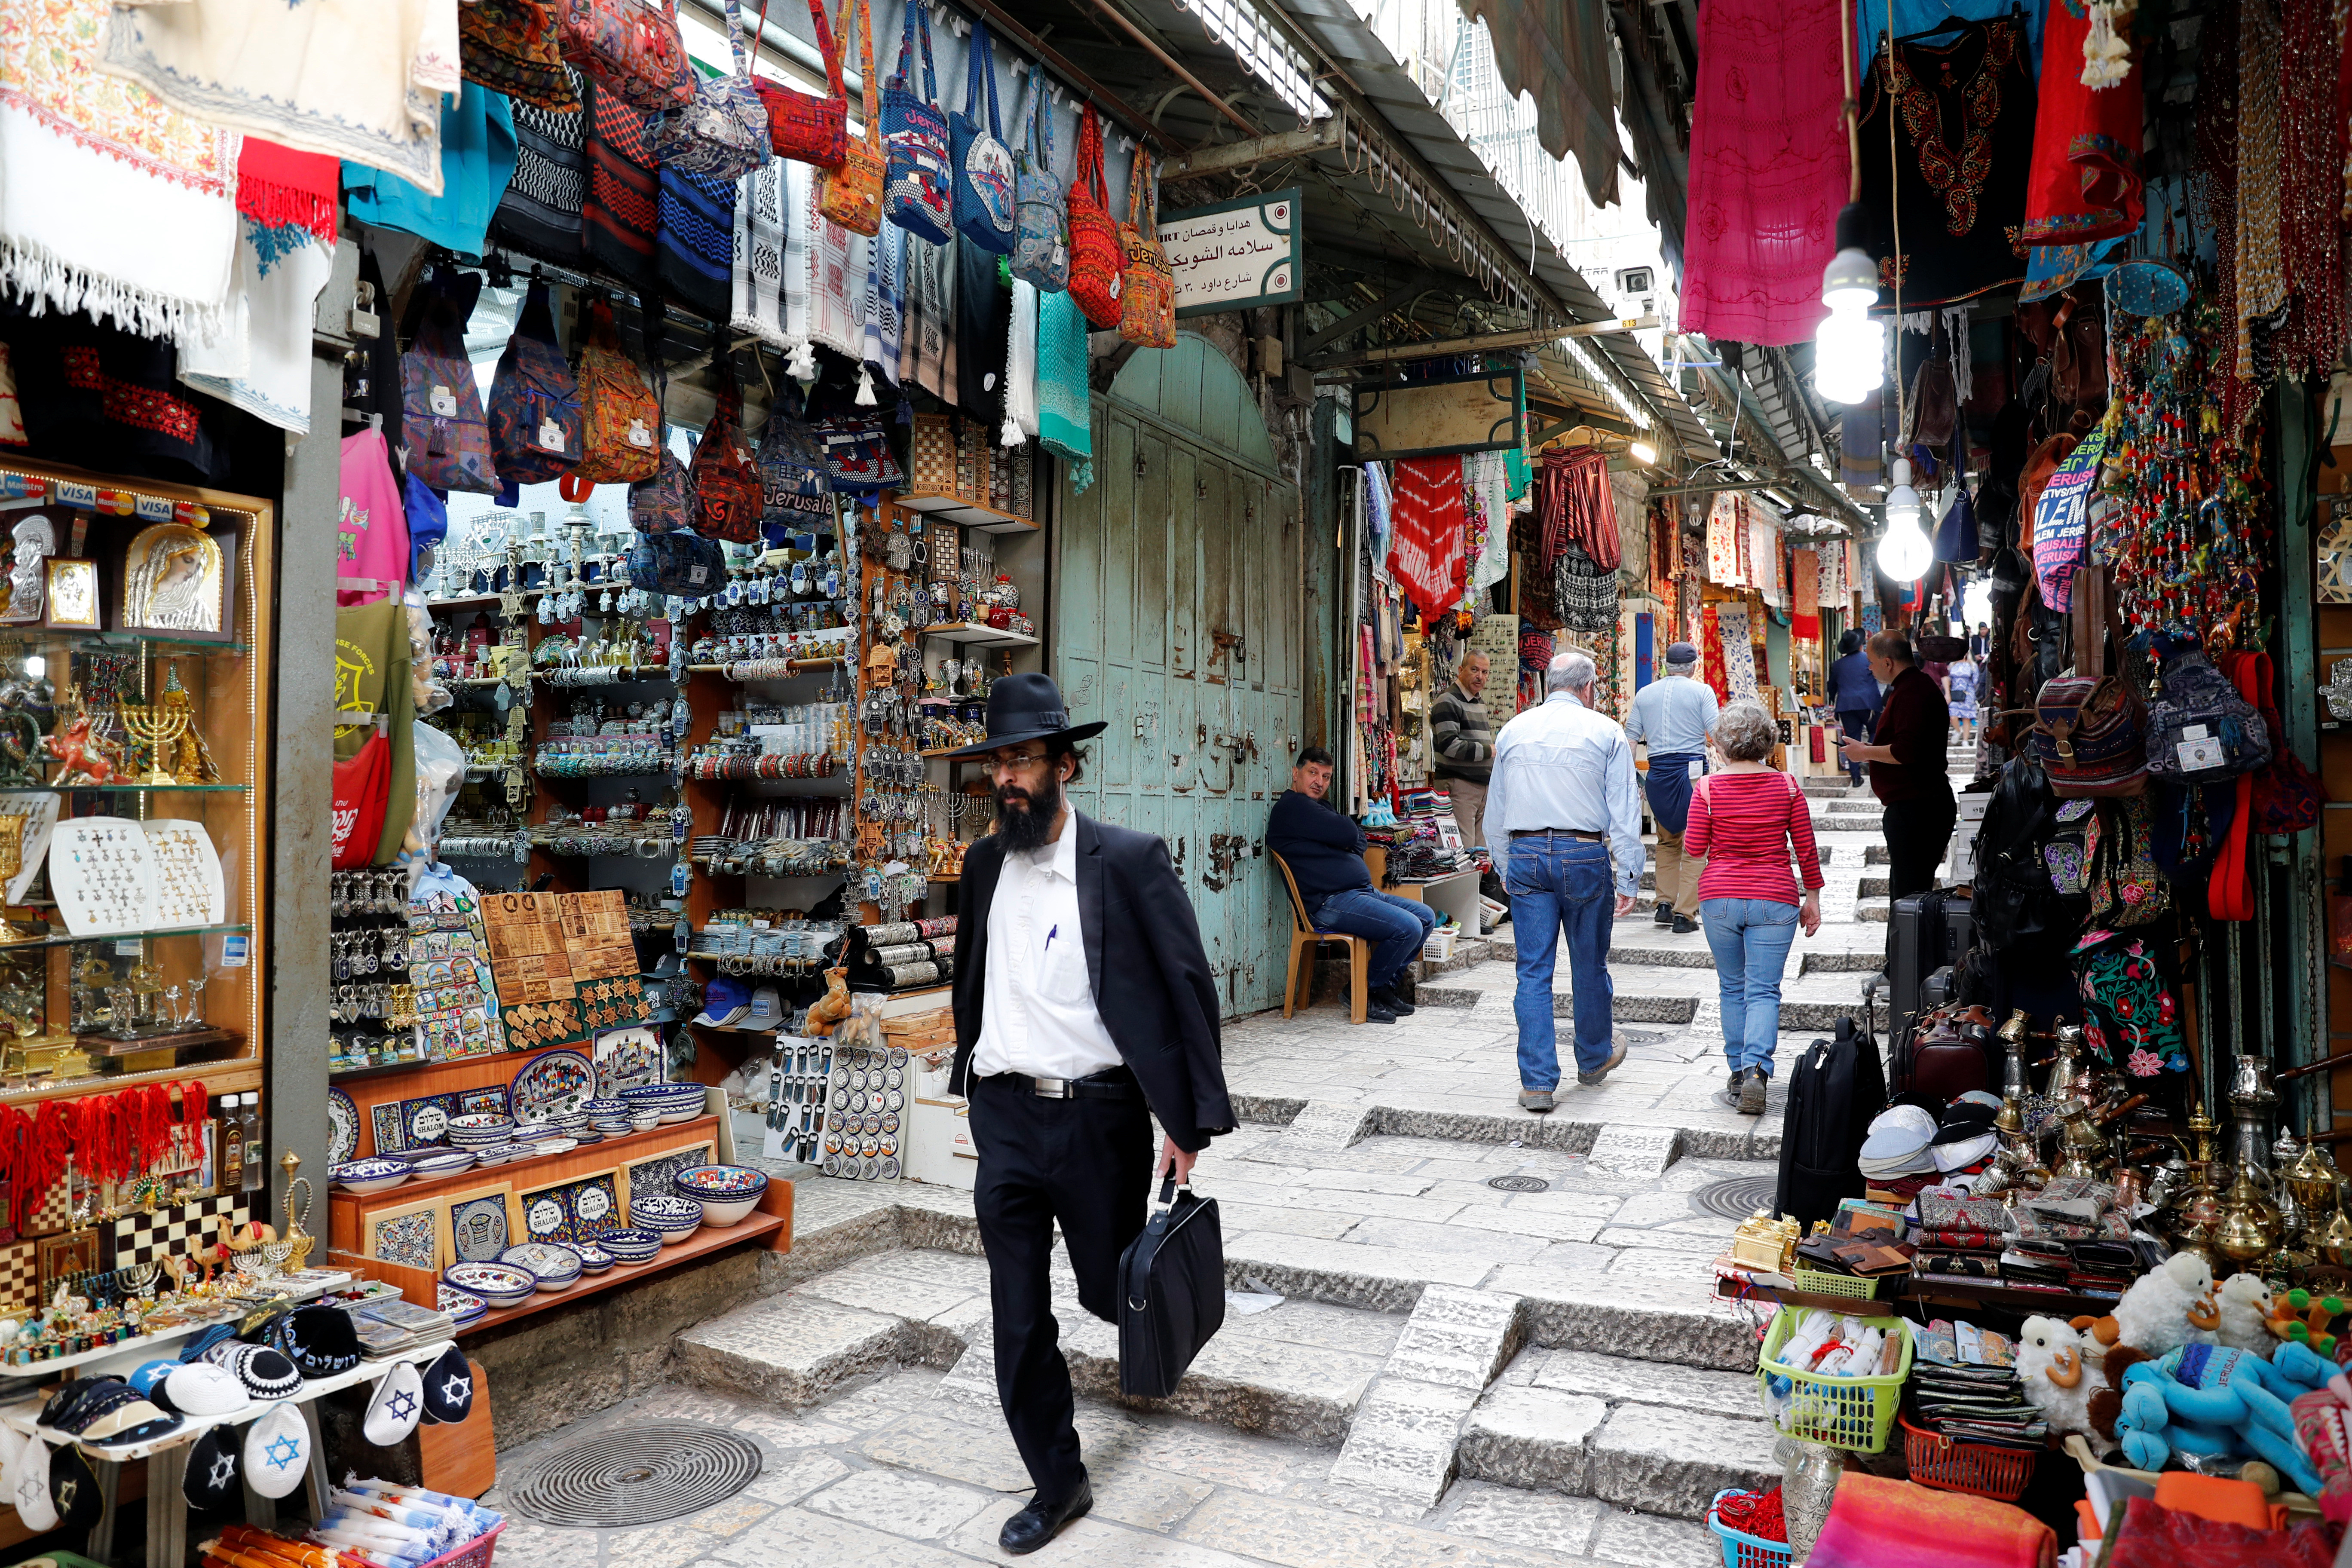 People walk around an alley in Jerusalem's Old City